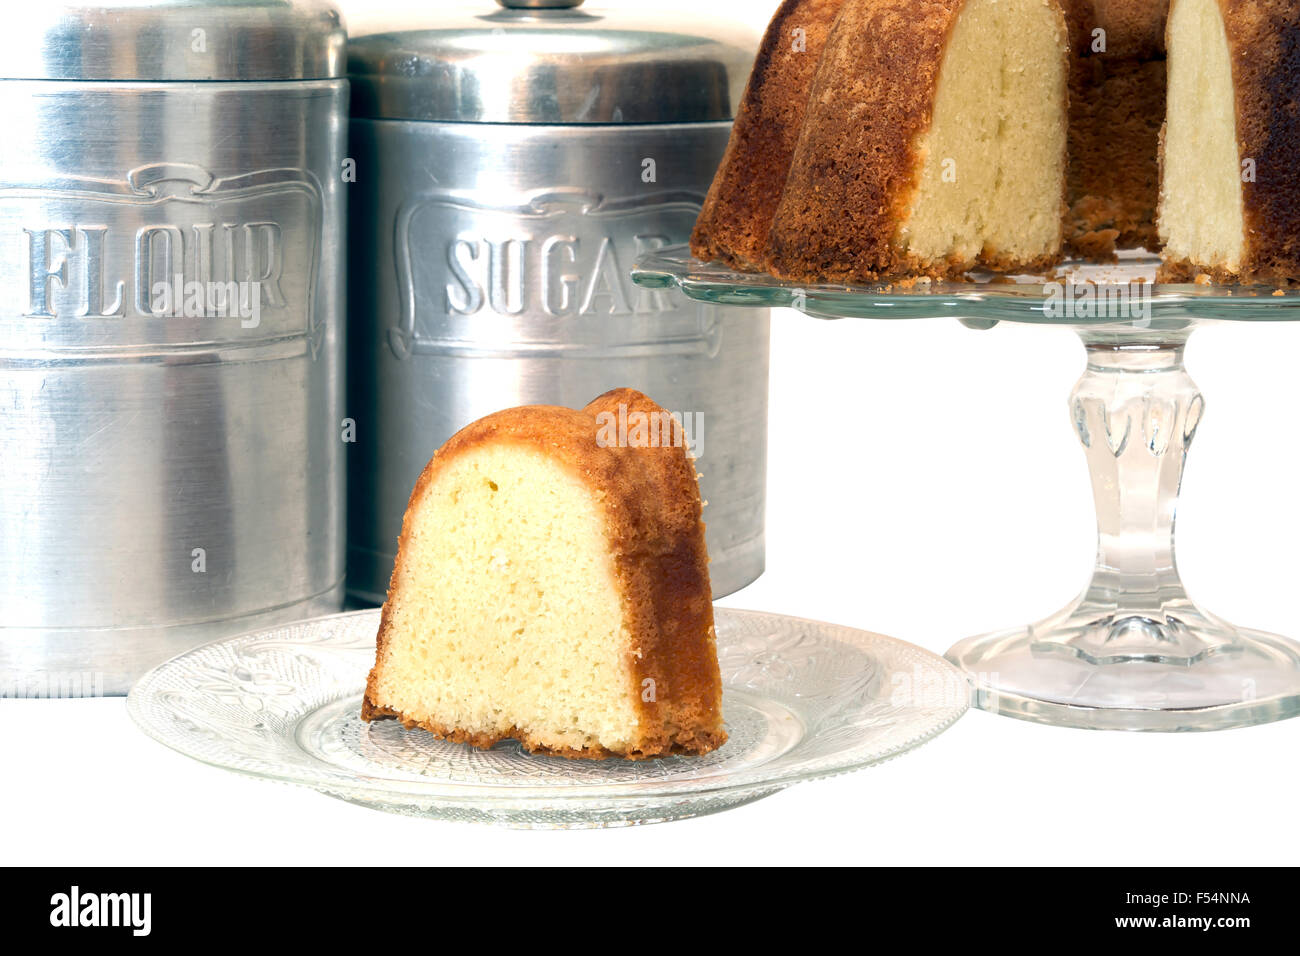 Slice of pound cake removed from whole cake along with flour and sugar canisters.  Isolated on white background. Stock Photo